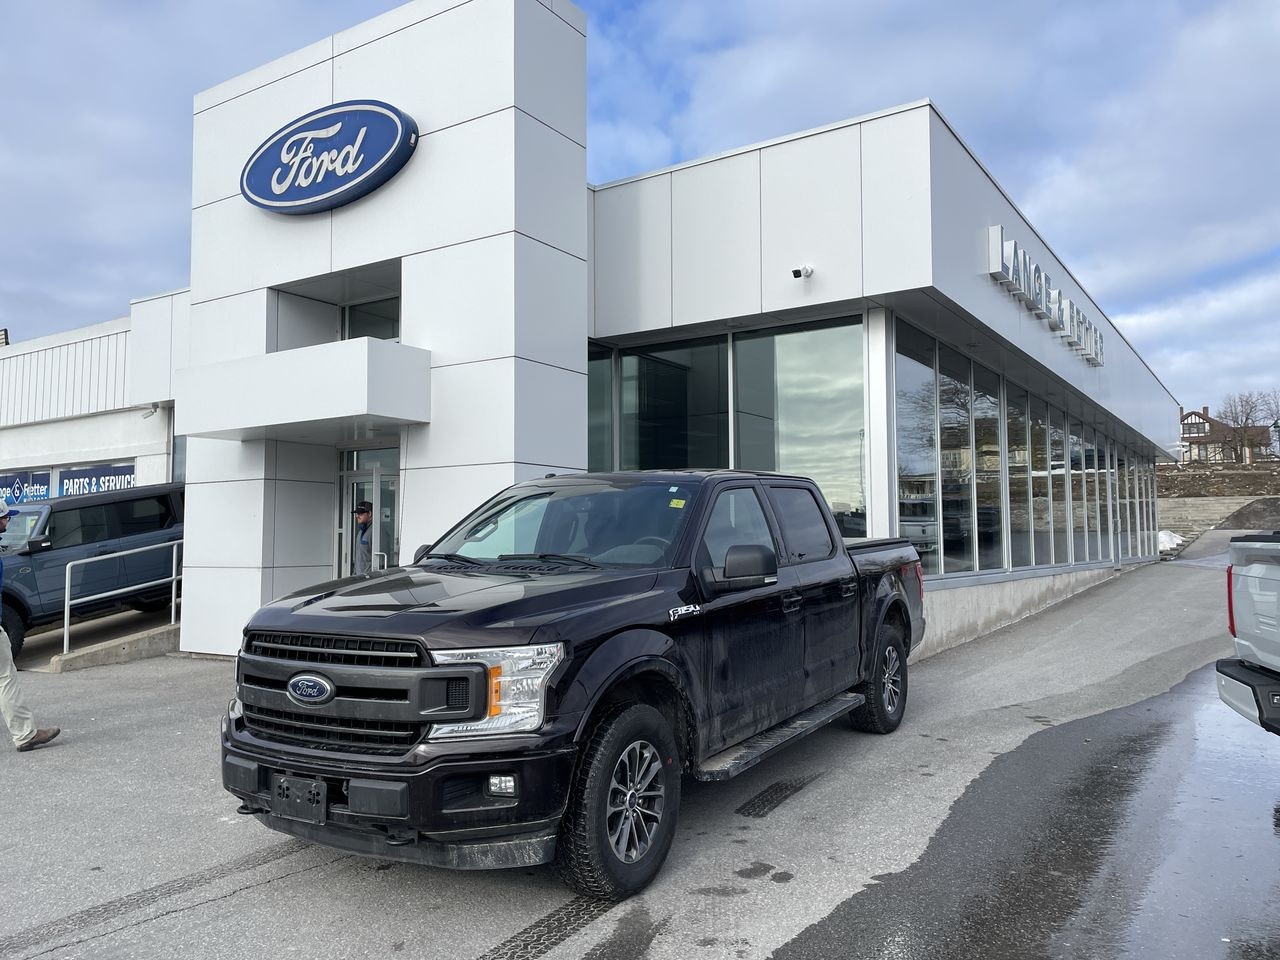 2018 Ford F-150 - 21560A Full Image 1